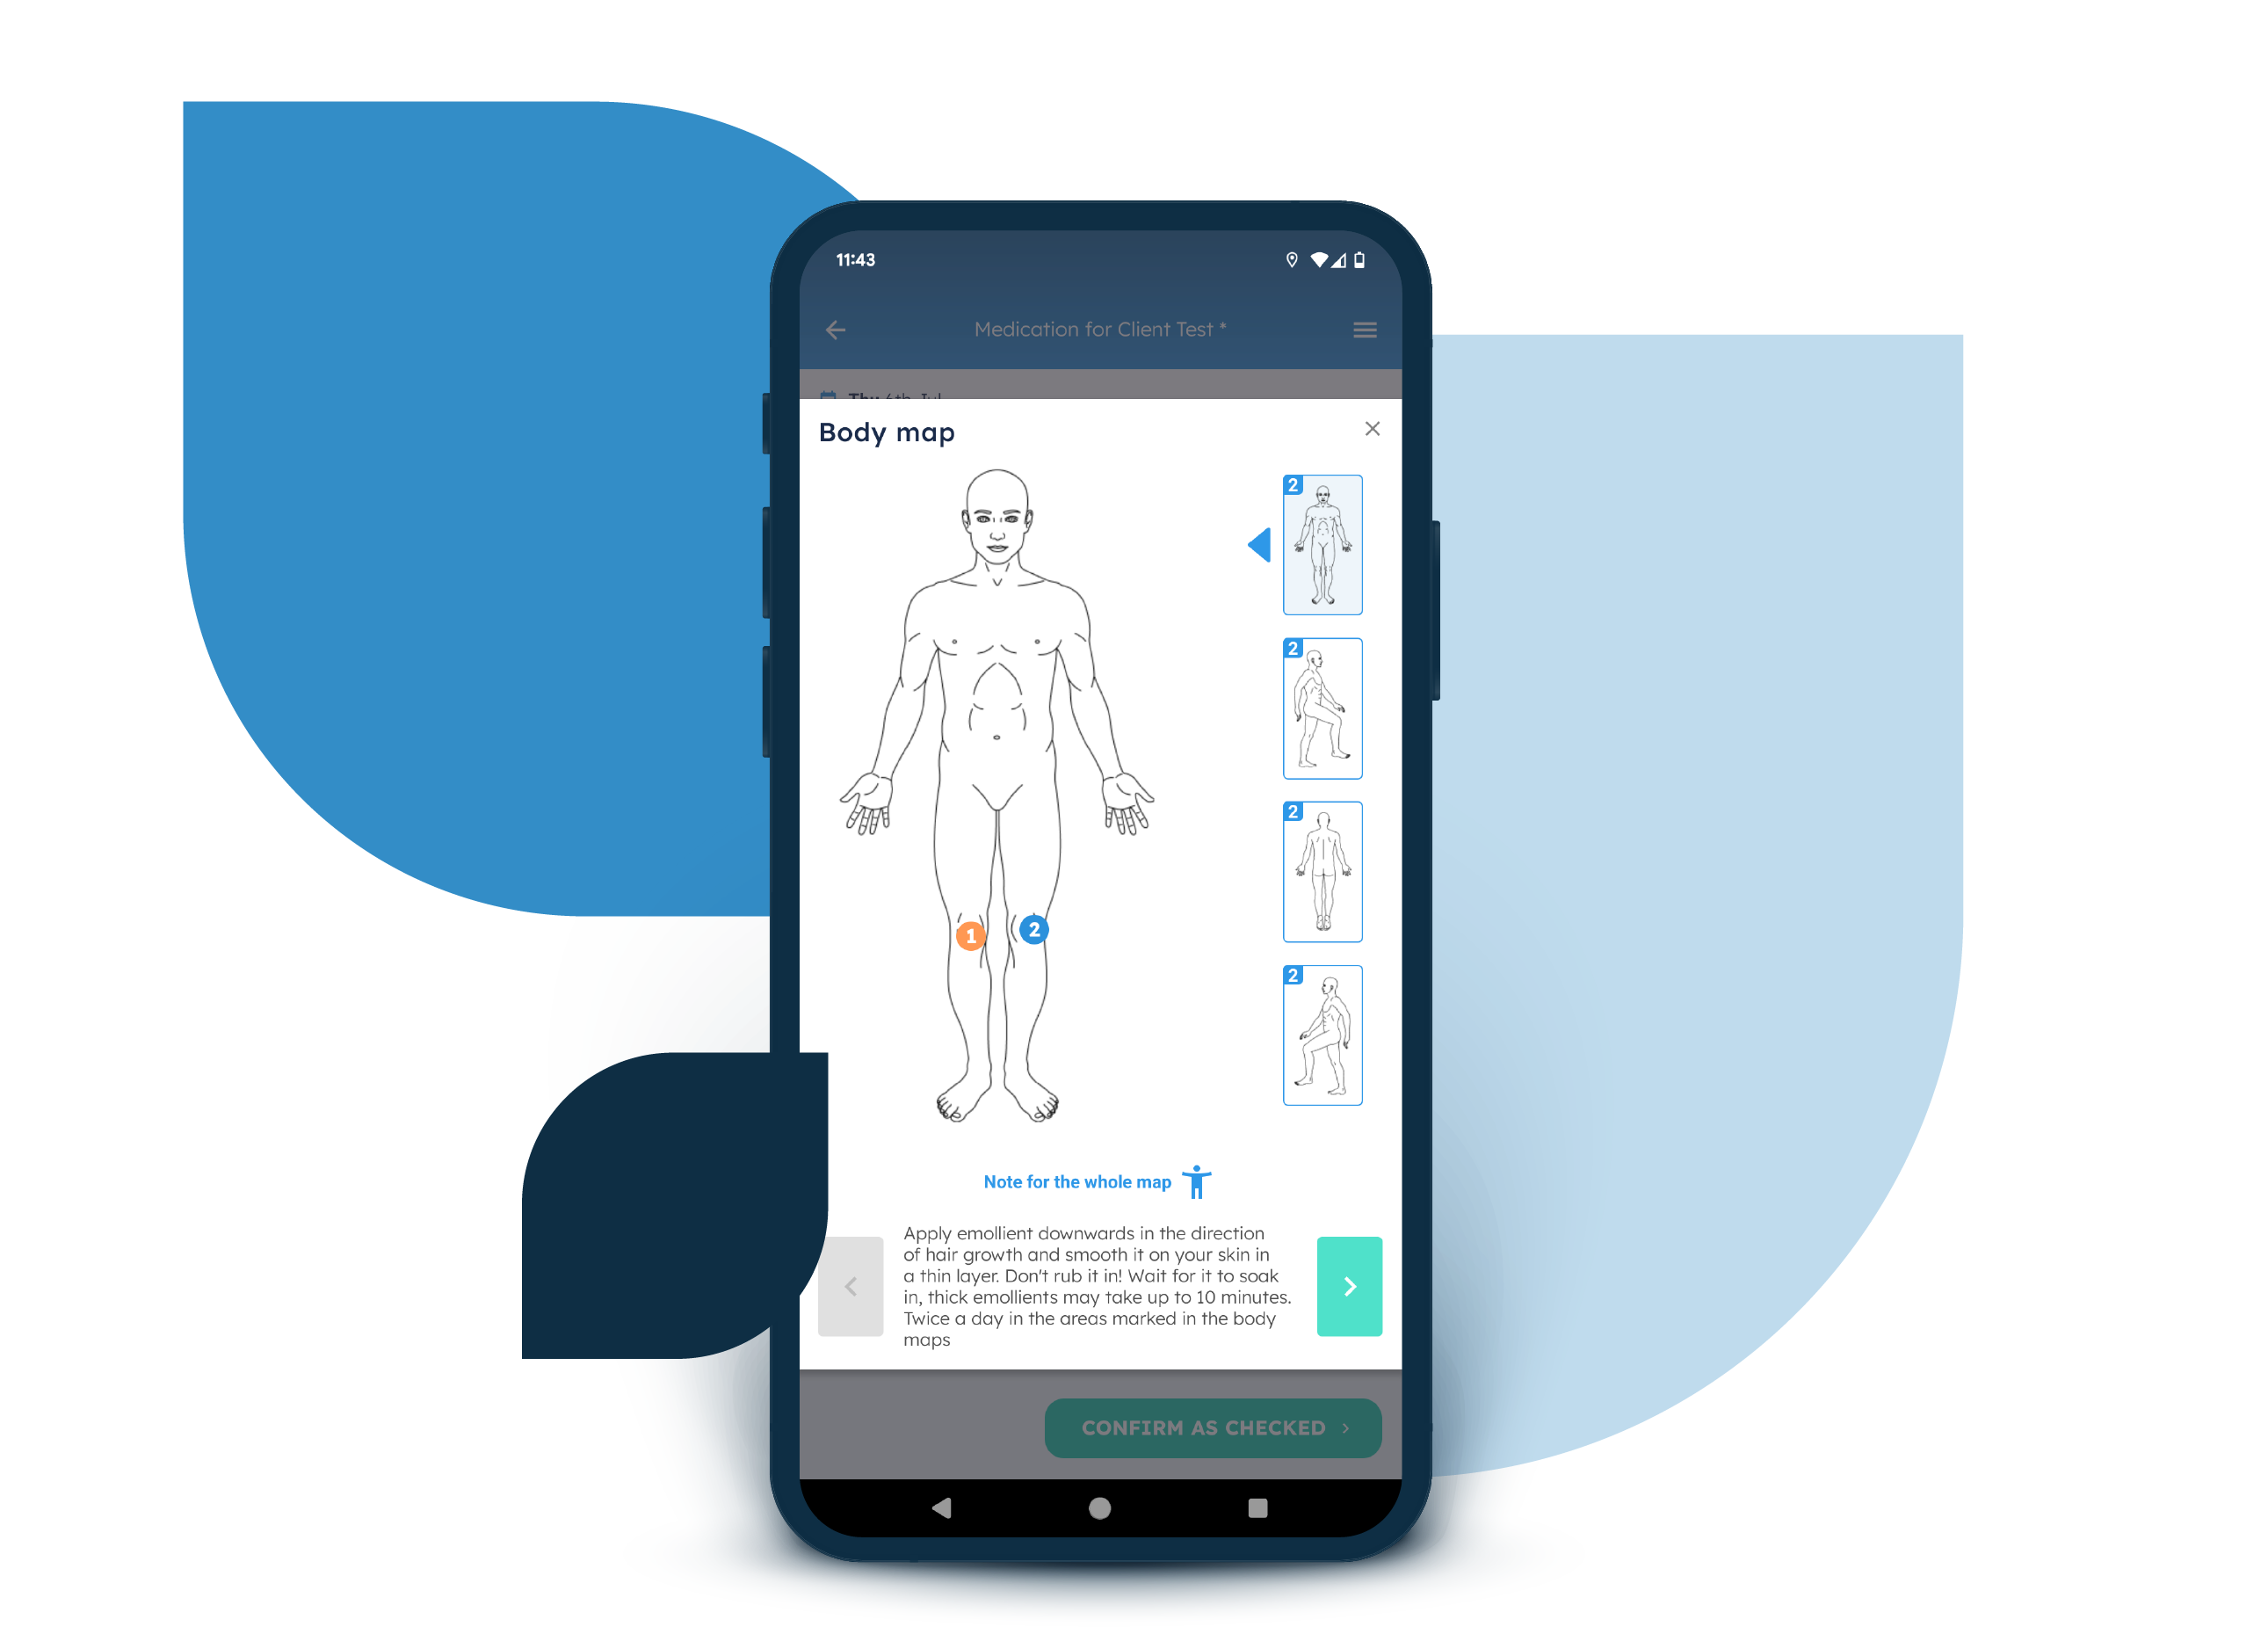 A body map displayed in Nursebuddy's mobile app for carers